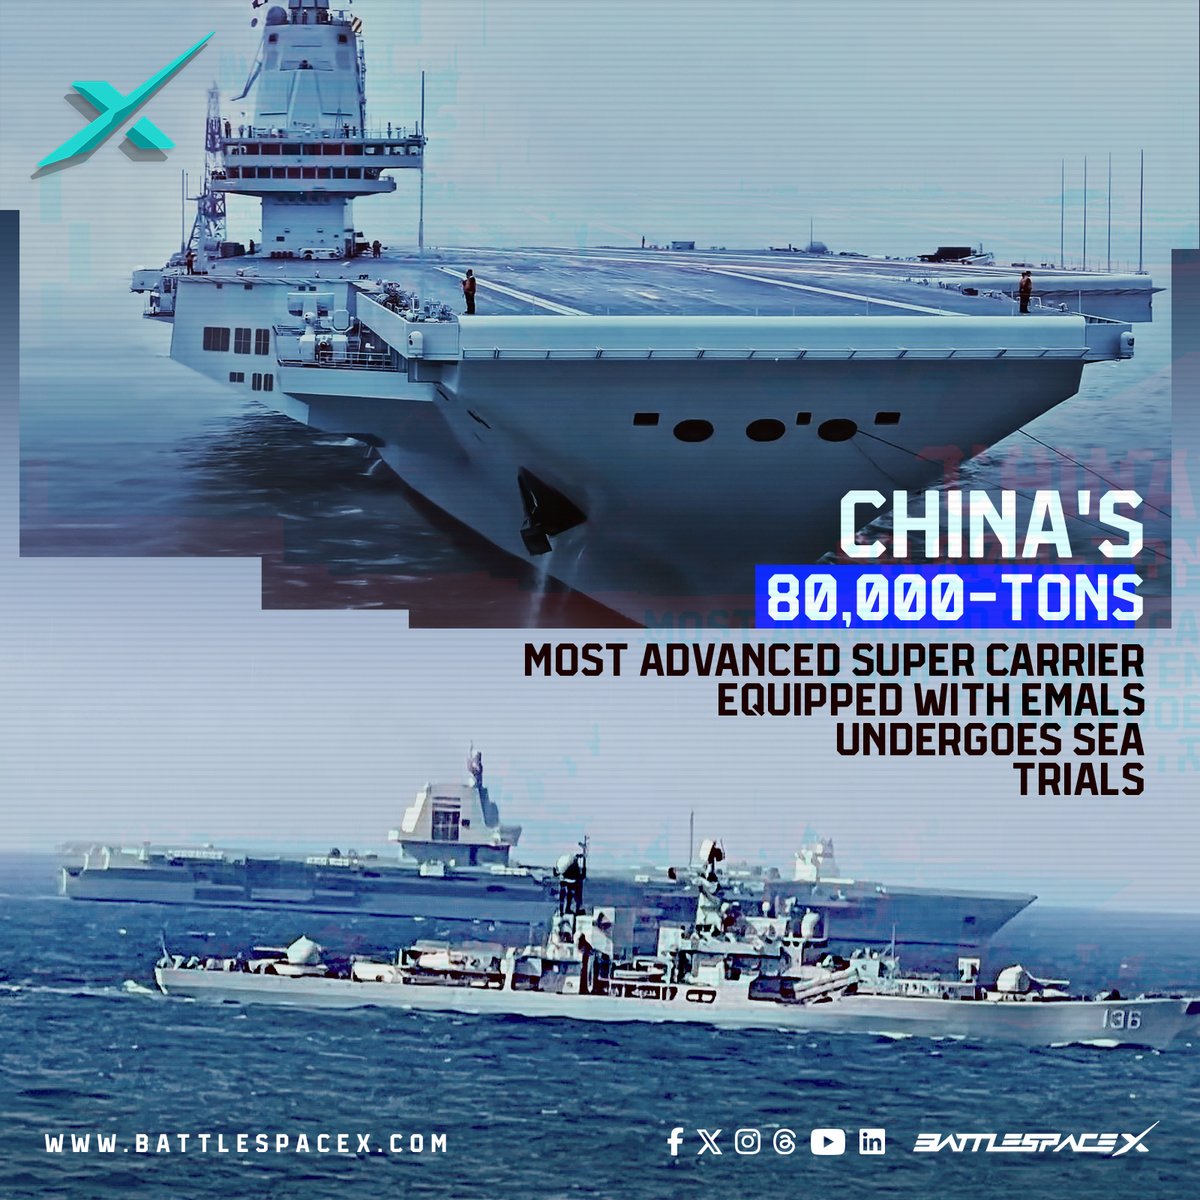 China strides in Naval Power Projection with 80,000-Tons Supercarrier Launch
Full Details: battlespacex.com/article/100

#Battlespacex #supercarrier #aircraftcarriers #fujian #type003 #chineseaircraftcarrier #chinesenavalpower #china #chinesemilitary #chinesenavy #navy